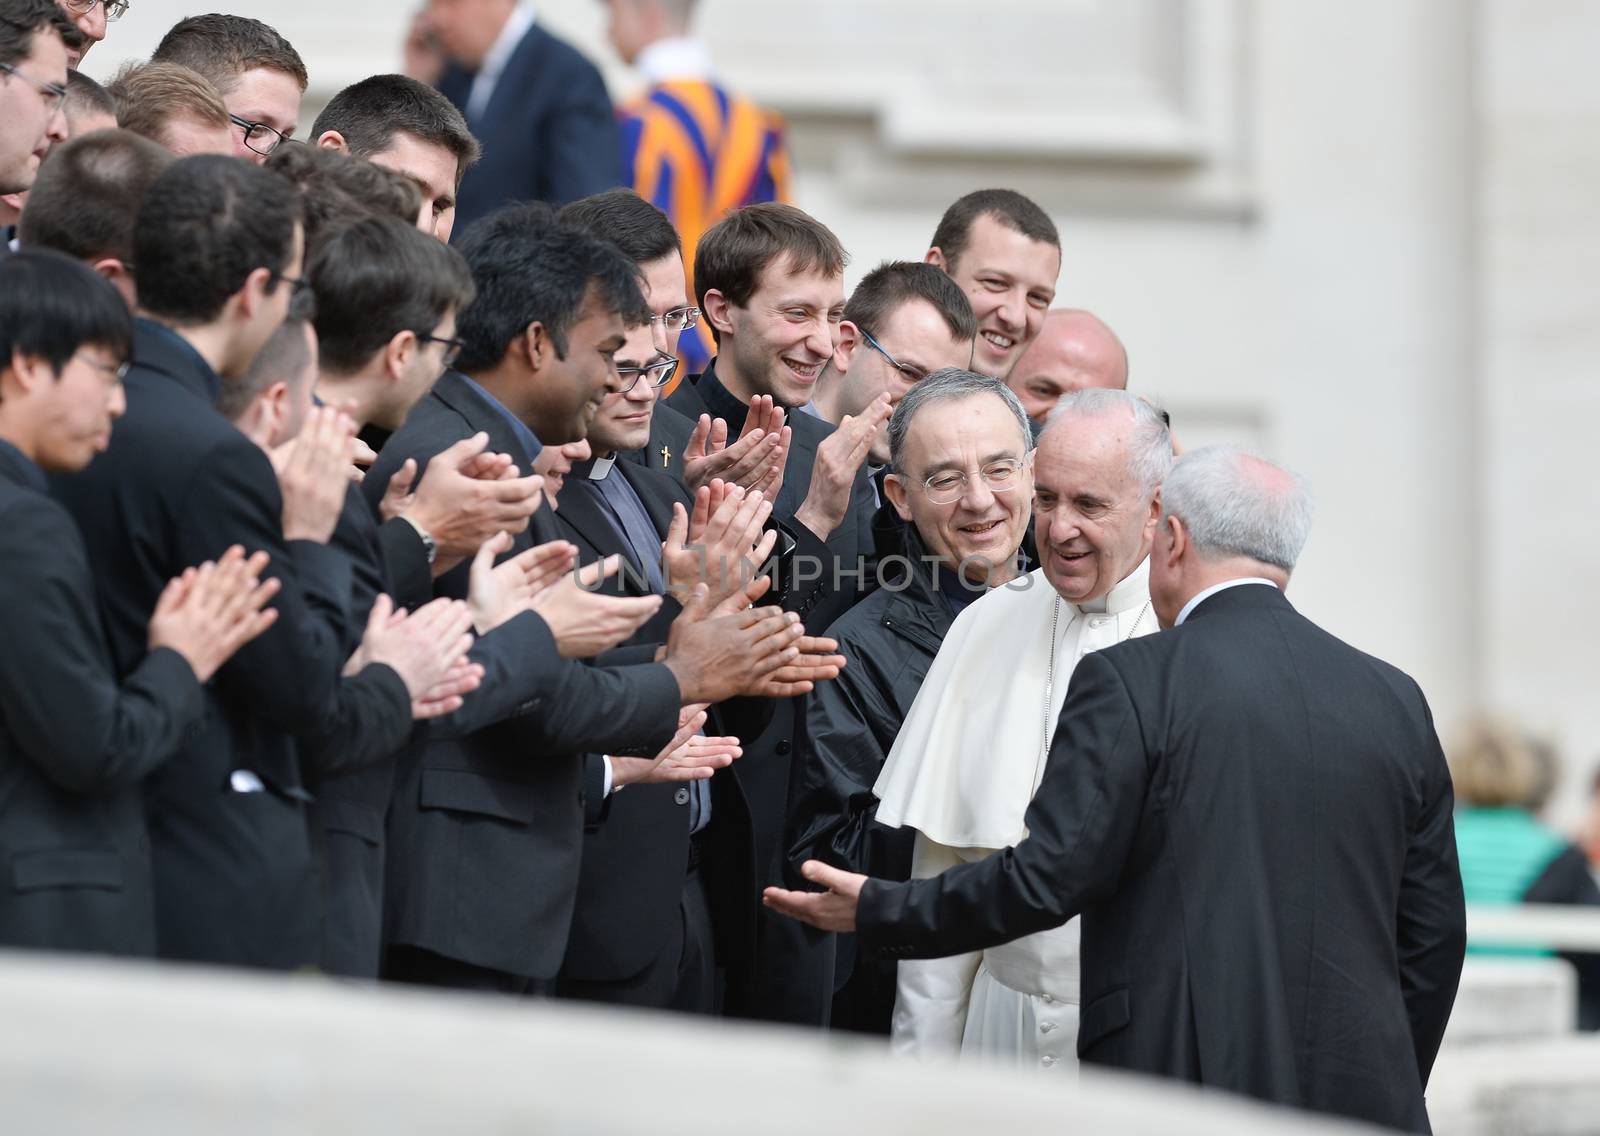 VATICAN, Rome: Pope Francis greets worshippers at his weekly general audience in St. Peter's Square, at the Vatican on April 13, 2016.The Pope's message was that Jesus is a good doctor, and there is no sickness he cannot cure. He went on to mention how Jesus got sinners, including St. Matthew, to follow him and be disciples. 